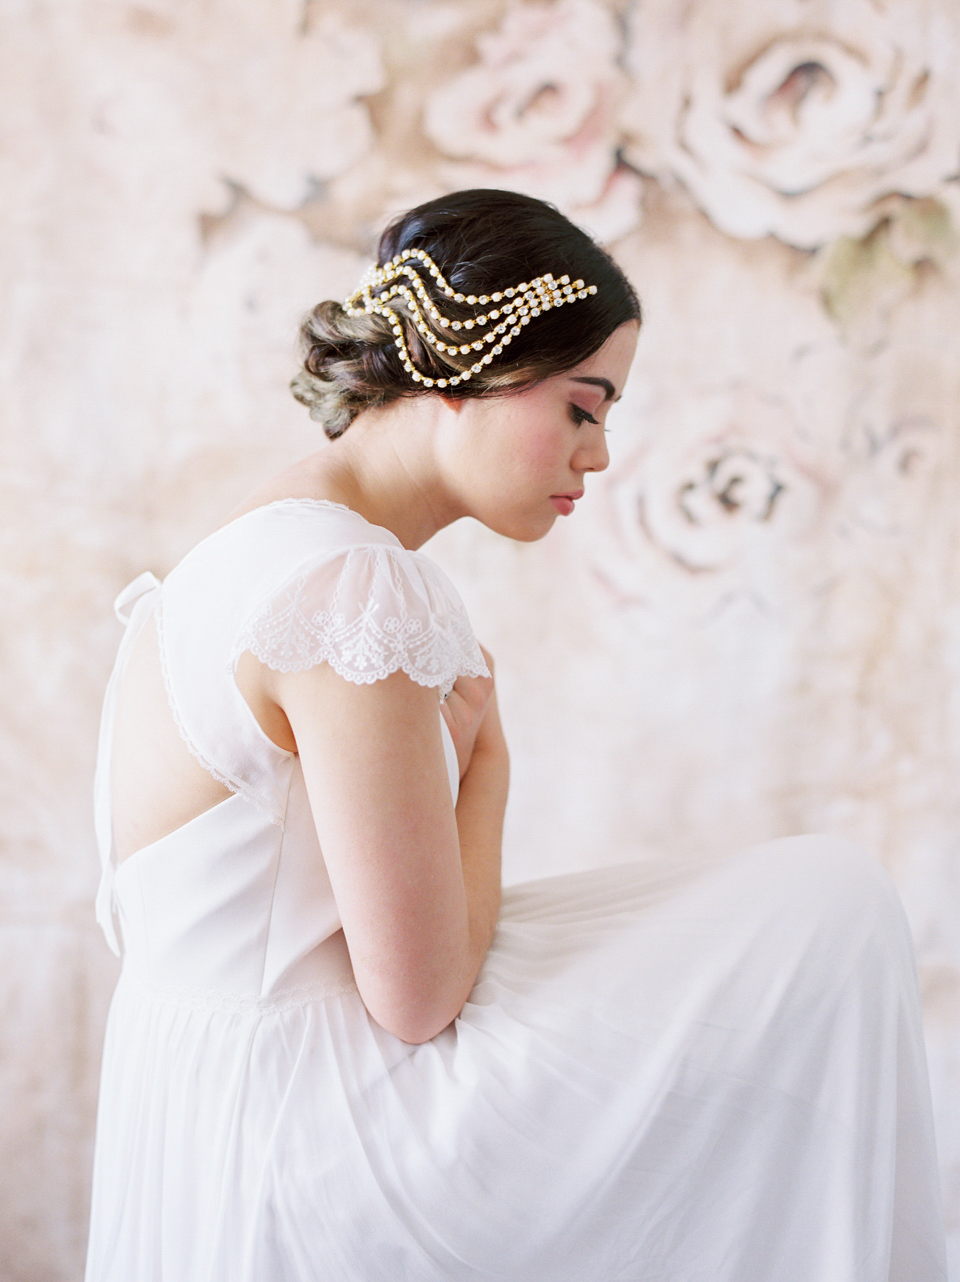 Unexpected Beauty - the new collection of bridal adornments from Danani.